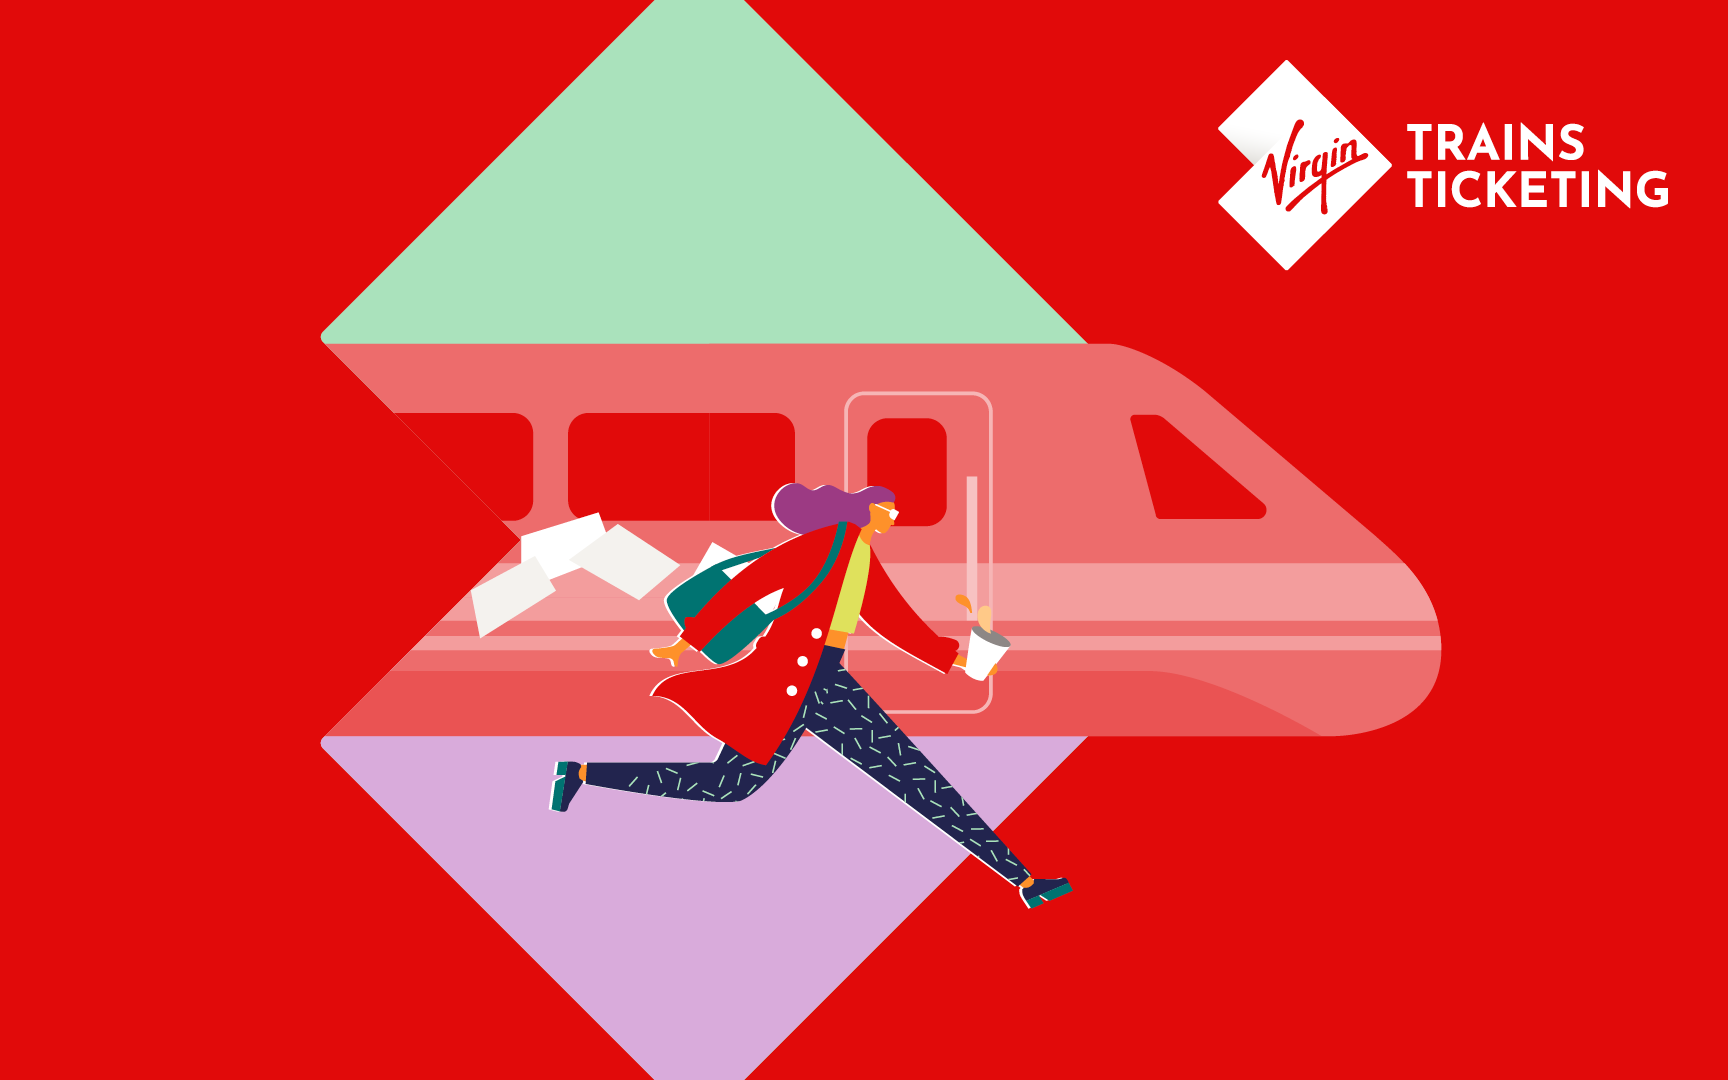 An animation showing someone rushing for a train